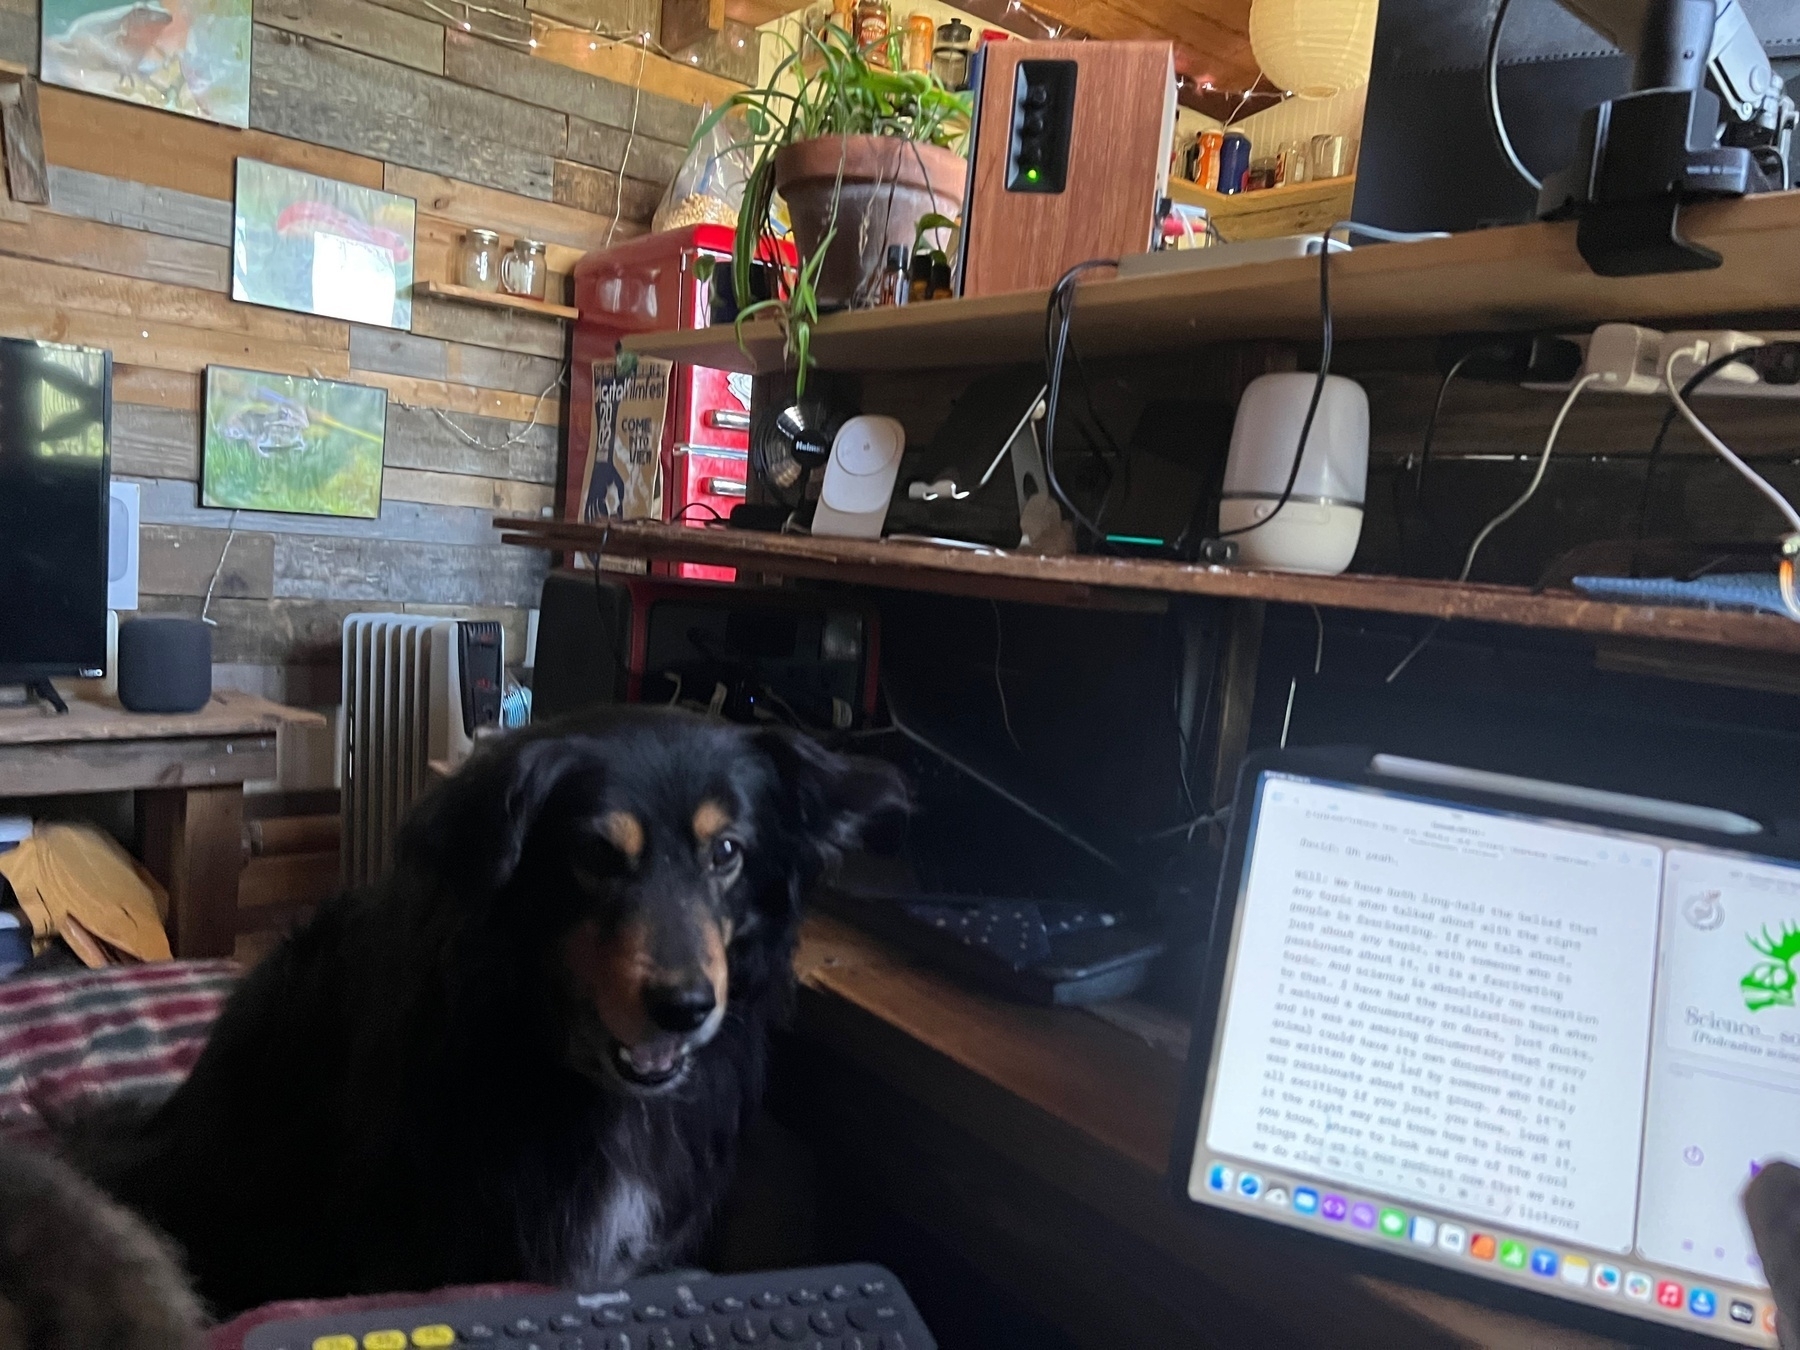 a black dog is looking at the photographer, and beginning to yawn. An iPad sits on the shelf to the right side, and in the background are very shelves and decorations in a tiny house